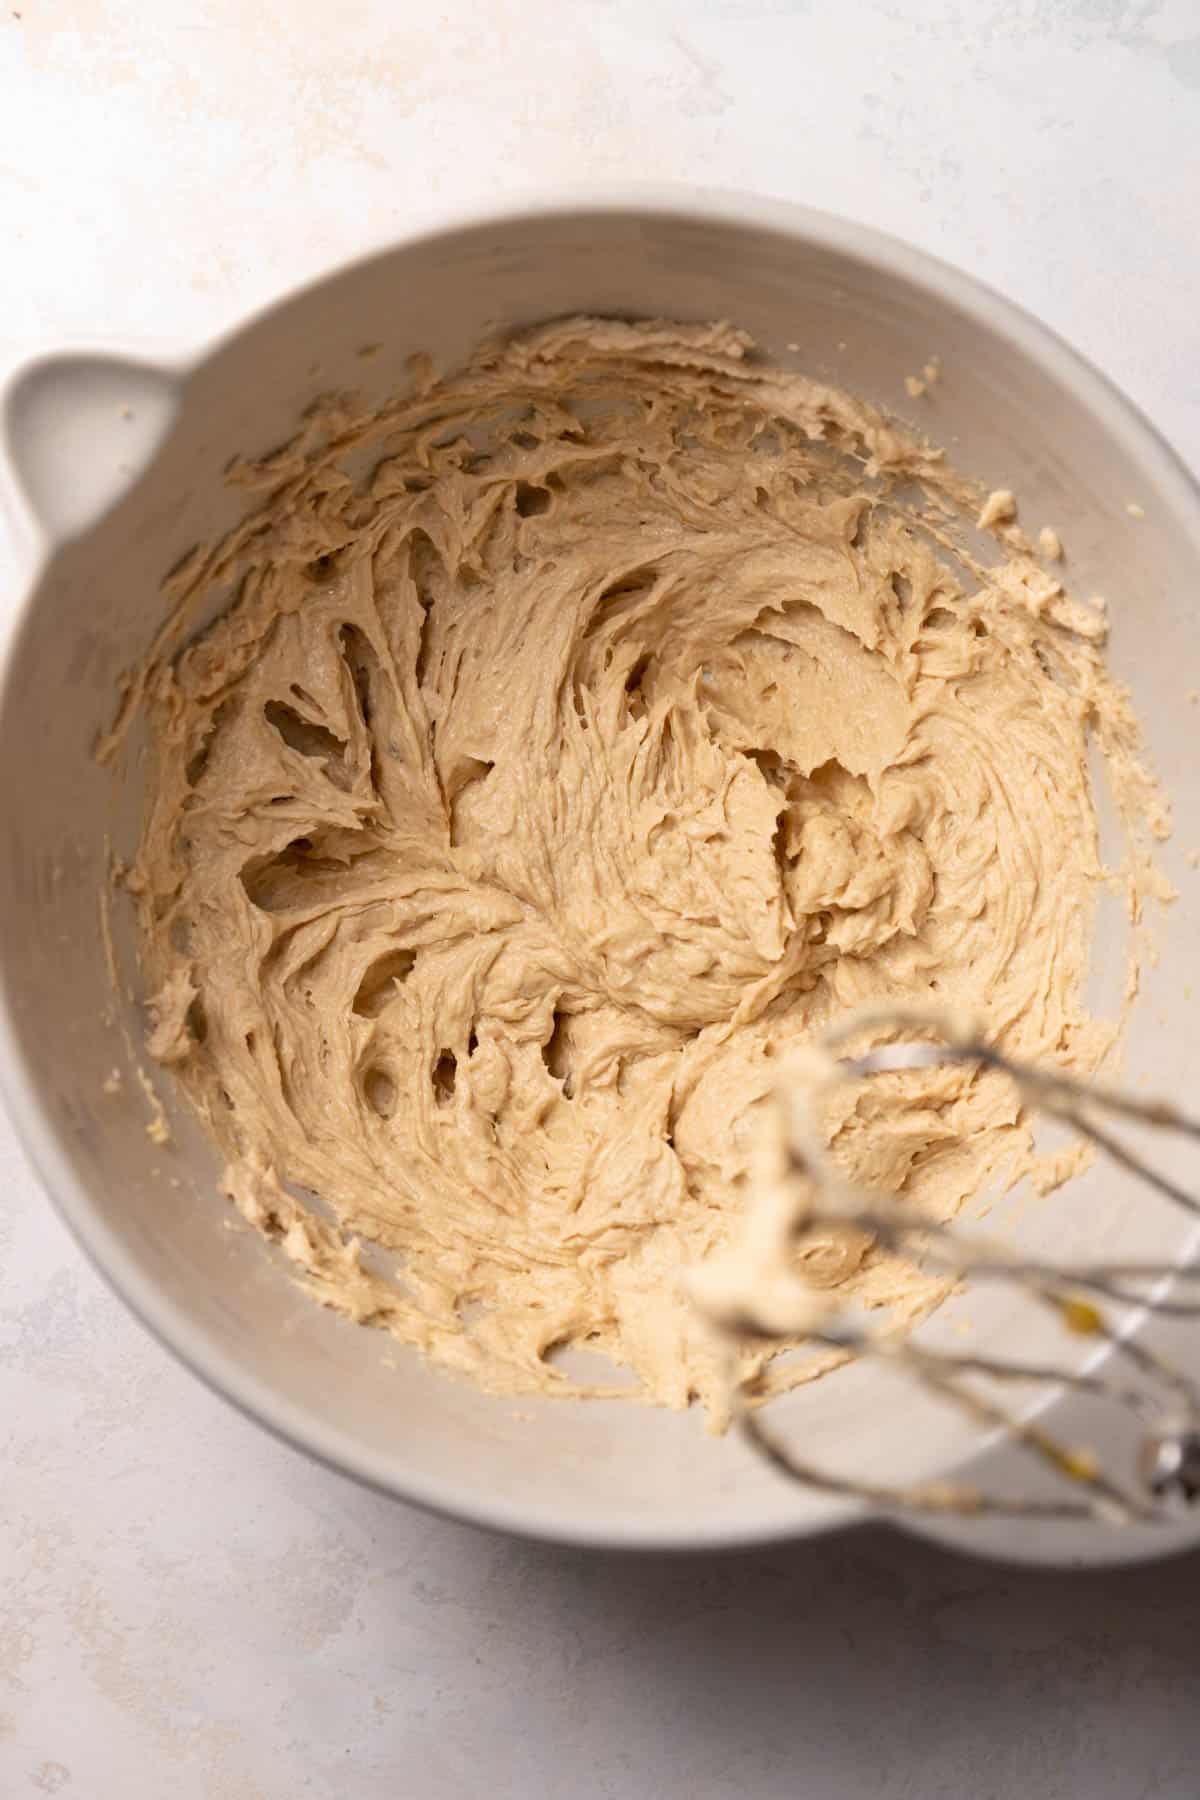 a mixing bowl with wet cookie dough.